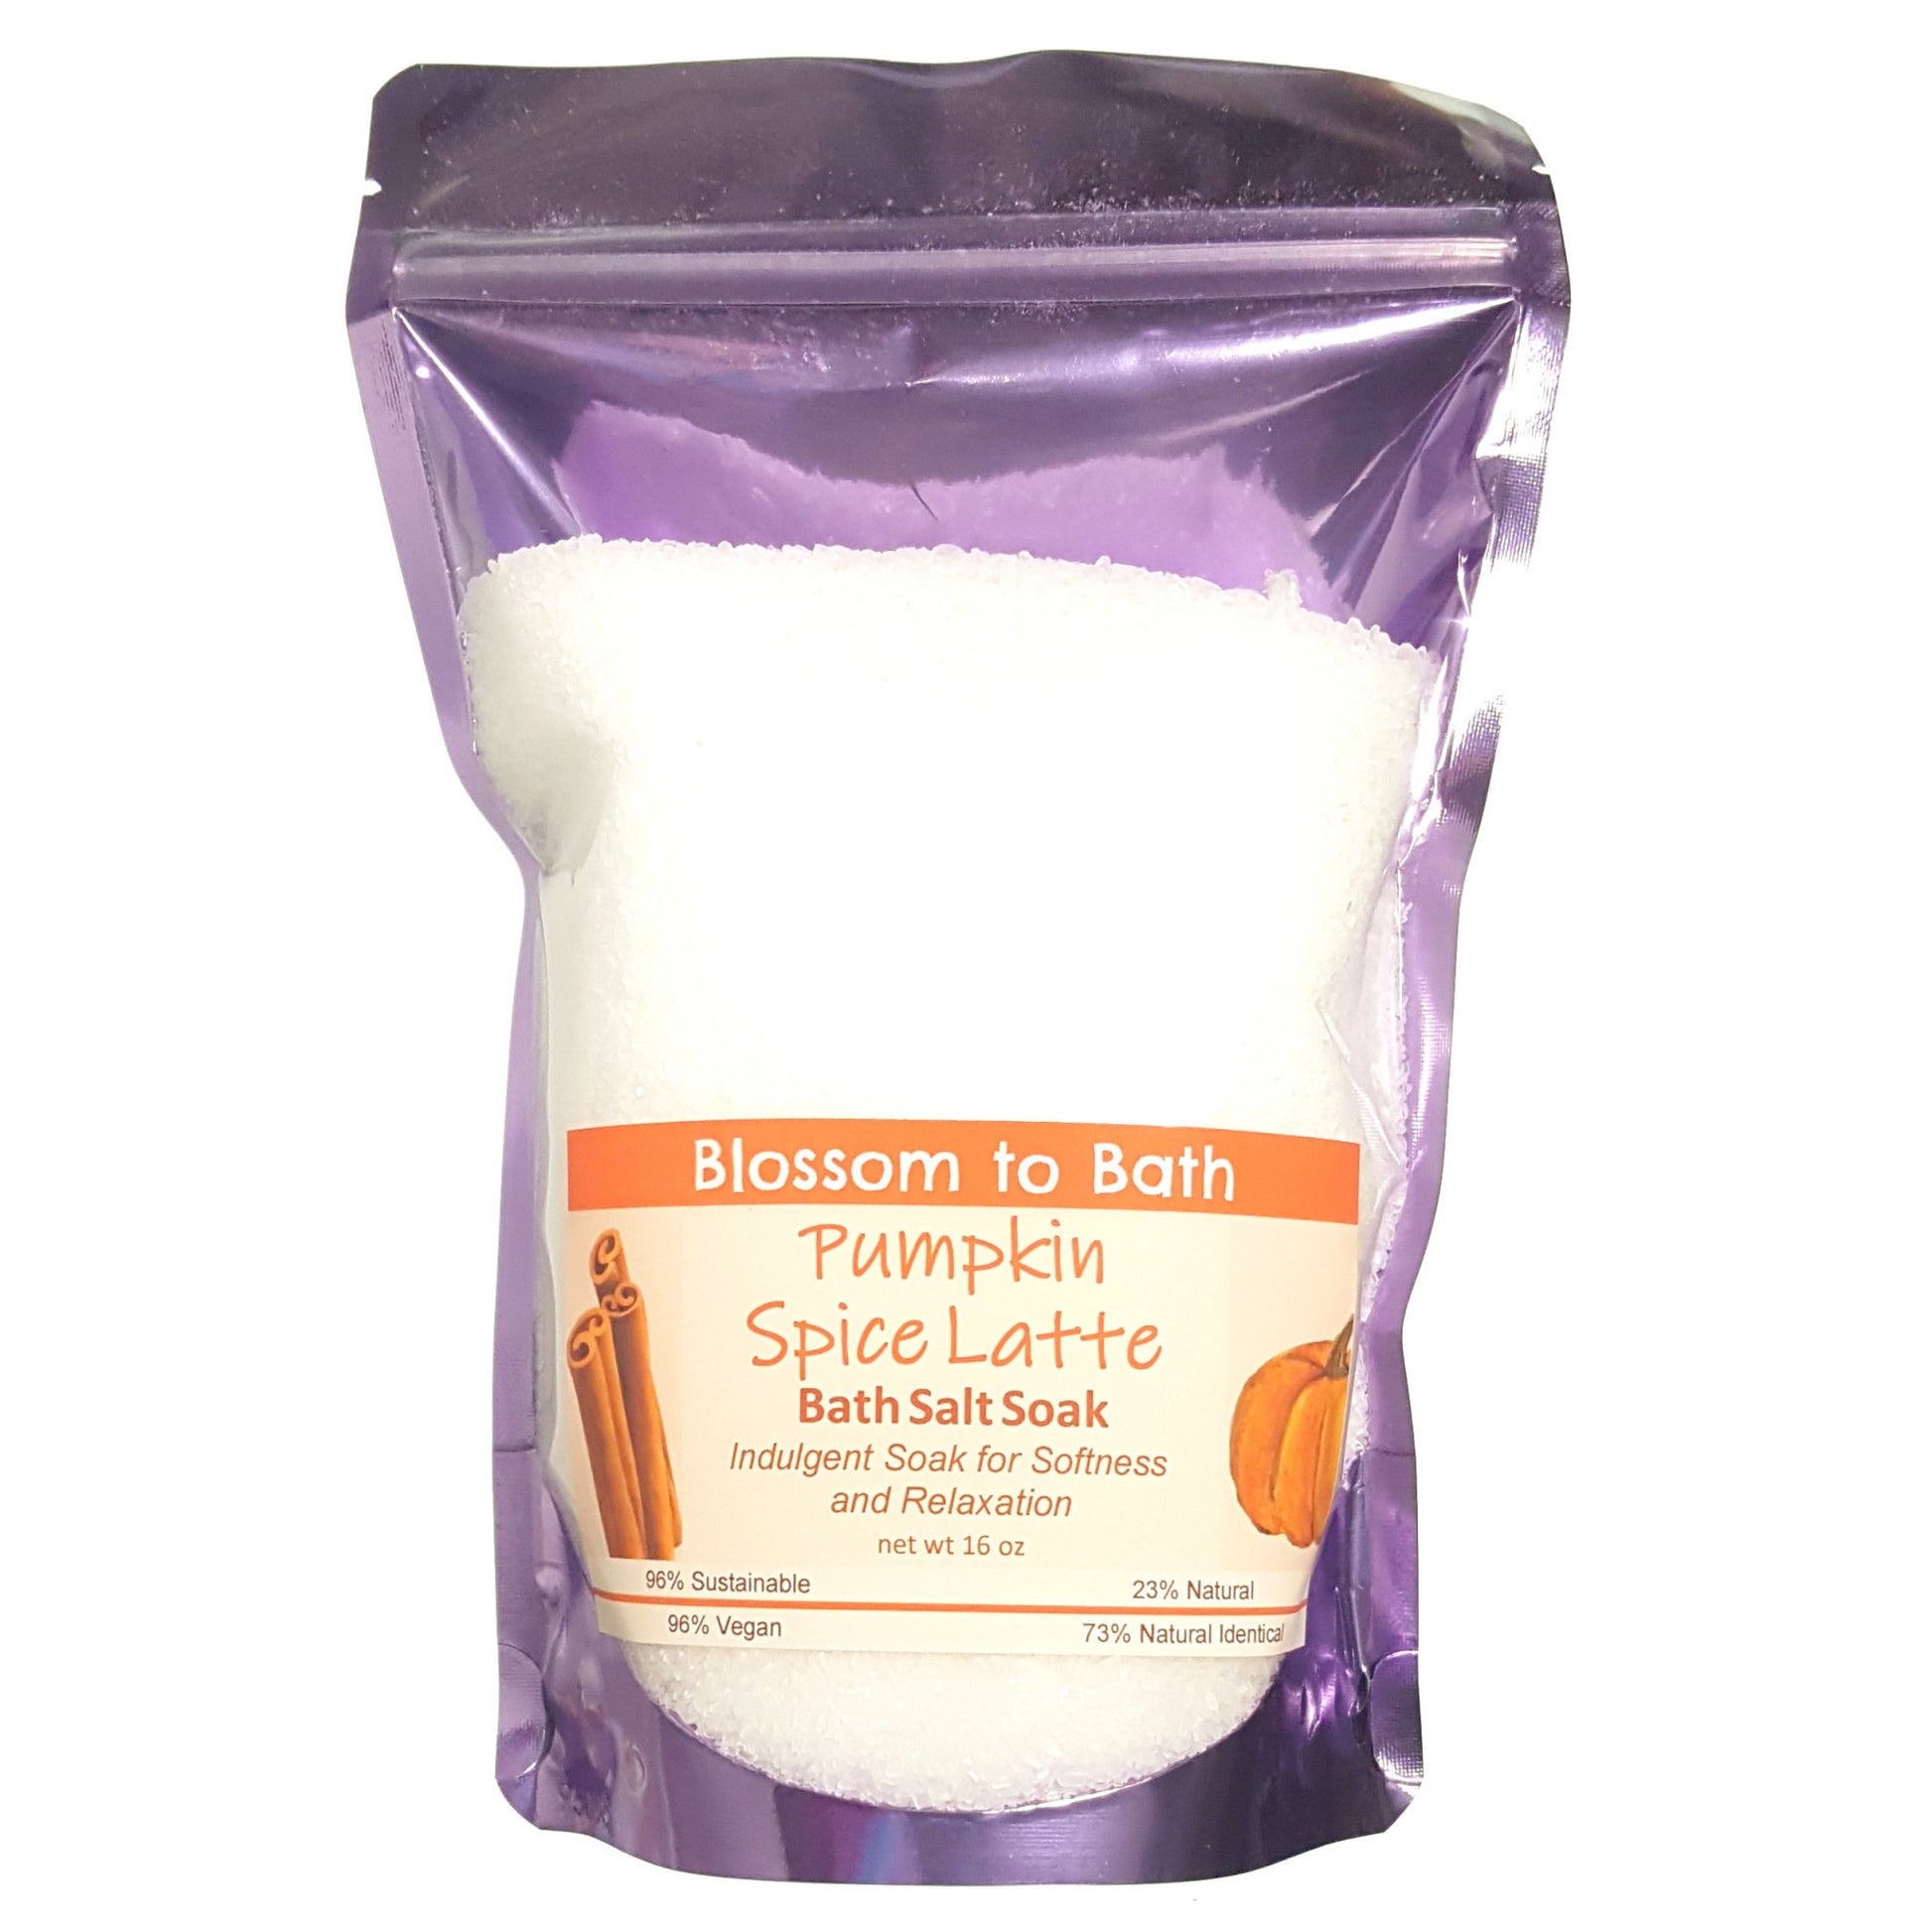 Buy Blossom to Bath Pumpkin Spice Latte Bath Salt Soak from Flowersong Soap Studio.  Scented epsom salts for a luxurious soaking experience  Deep vanilla and lightly fruited spice blend seamlessly with rich coffee.